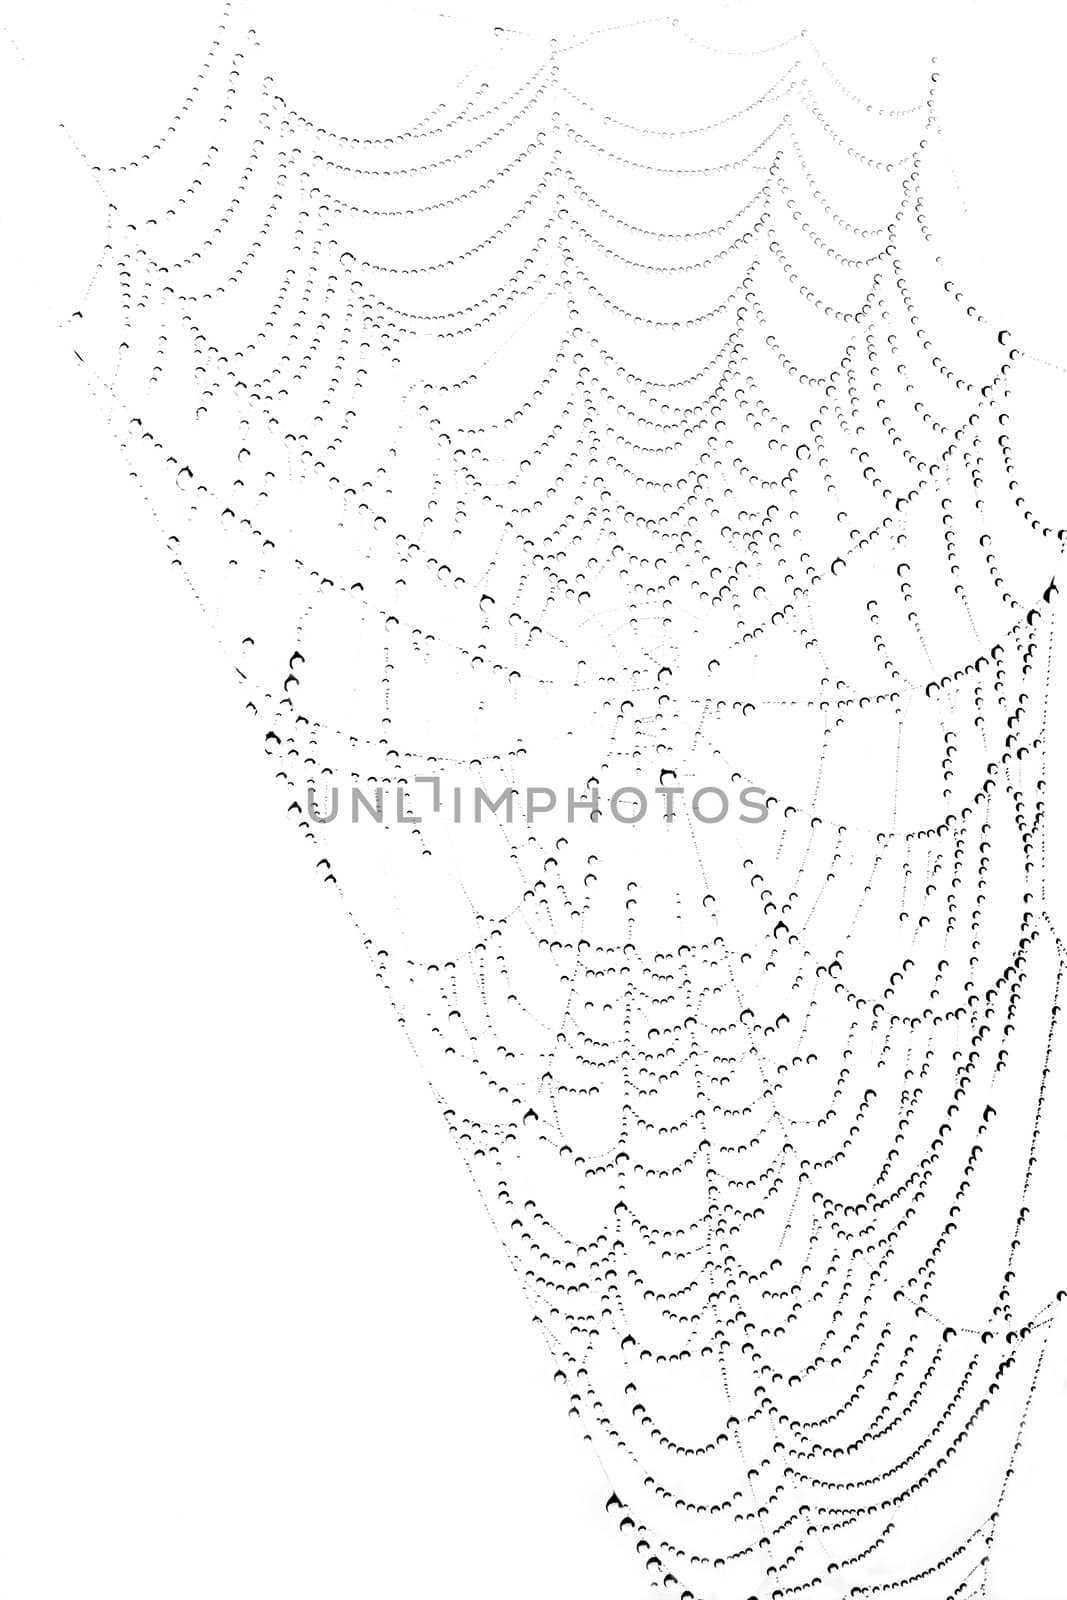 Spiderweb with waterdrops on white background by Colette